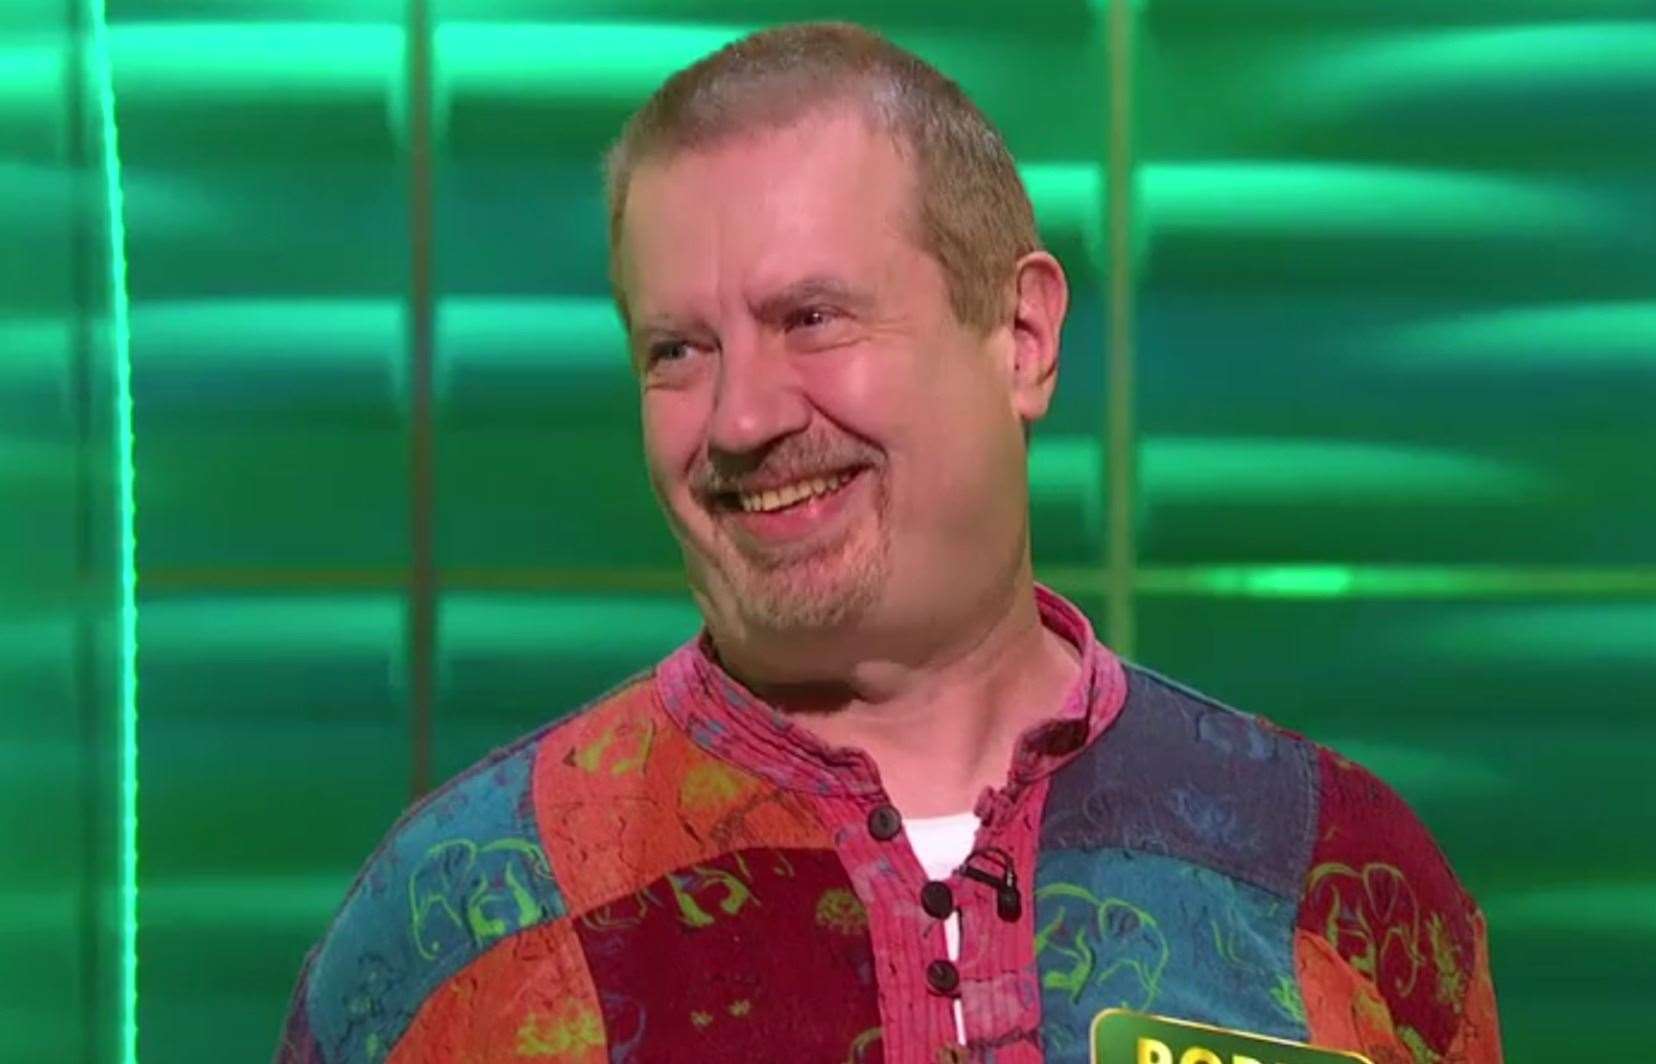 Robin Nixon took part in Channel 4 game show Moneybags with Craig Charles